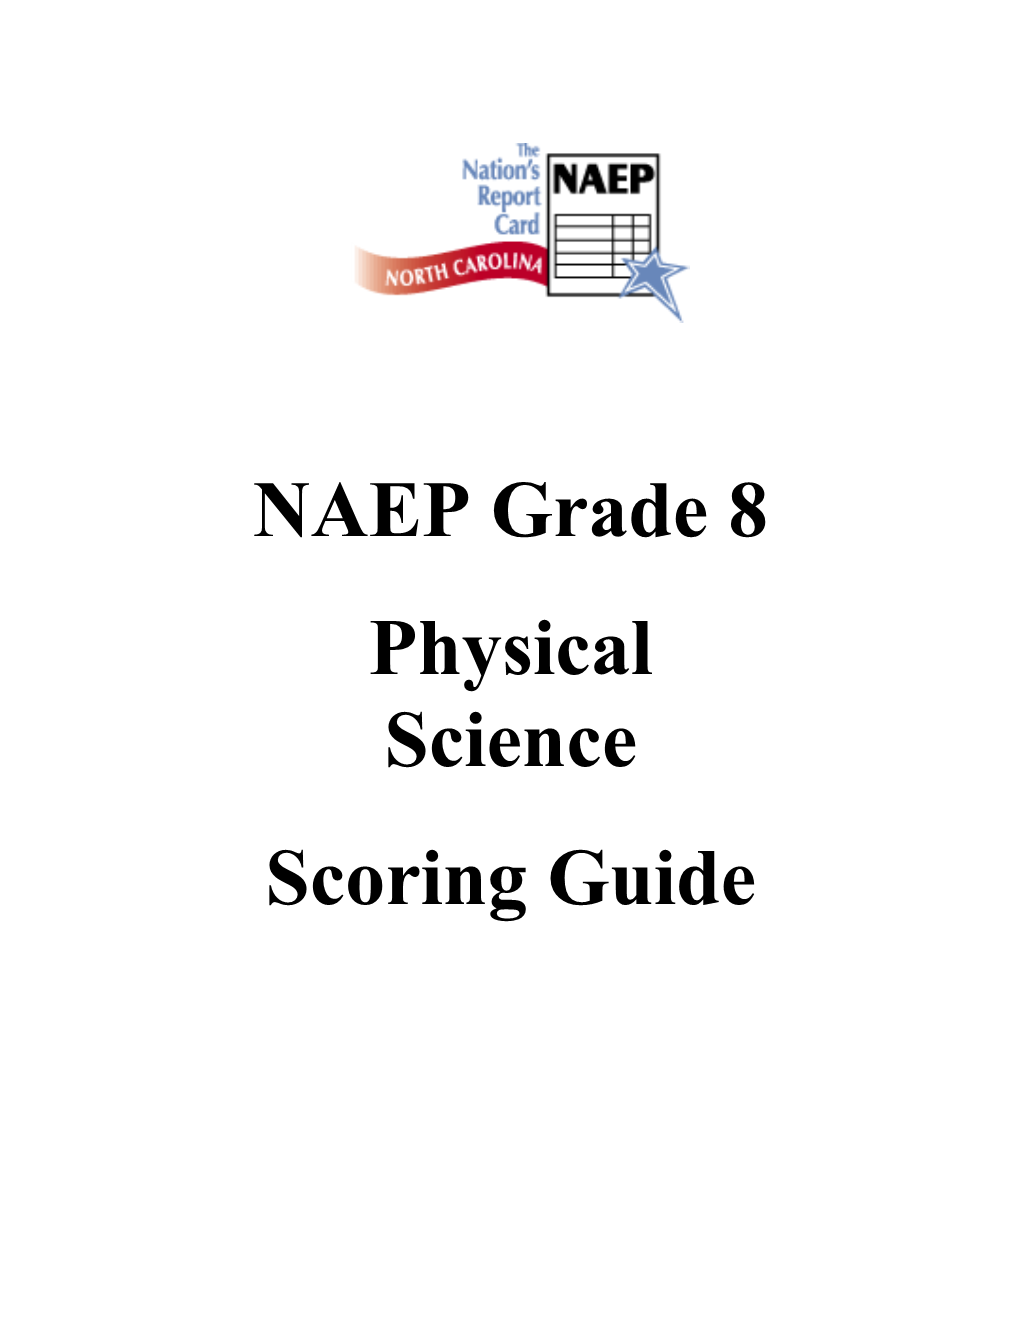 National Assessment of Educational Progress (NAEP) Released Items